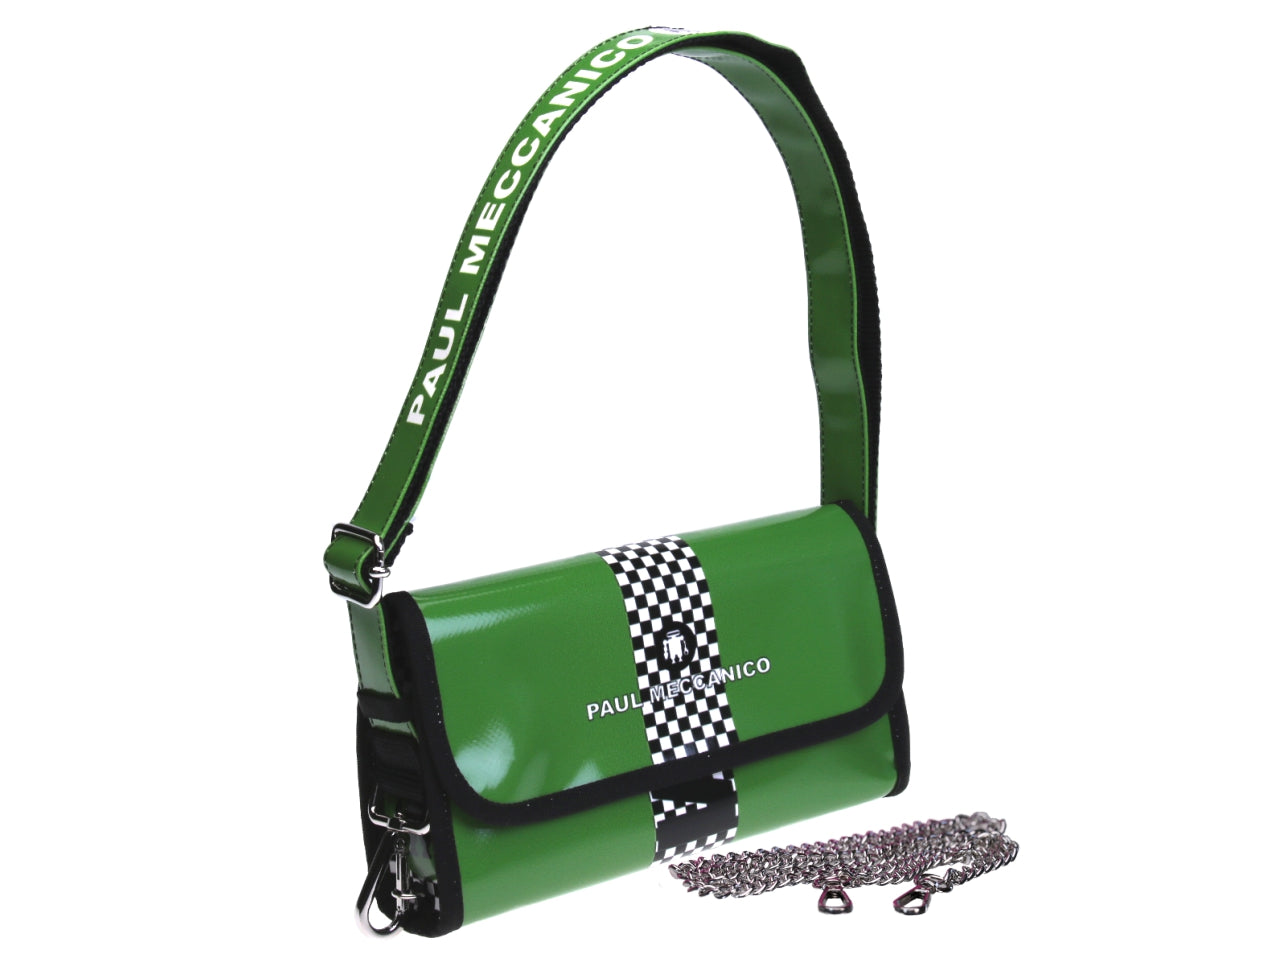 CLUTCH BAG APPLE GREEN "GRAND PRIX" STYLE. MODEL CANDY MADE OF LORRY TARPAULIN. - Limited Edition Paul Meccanico